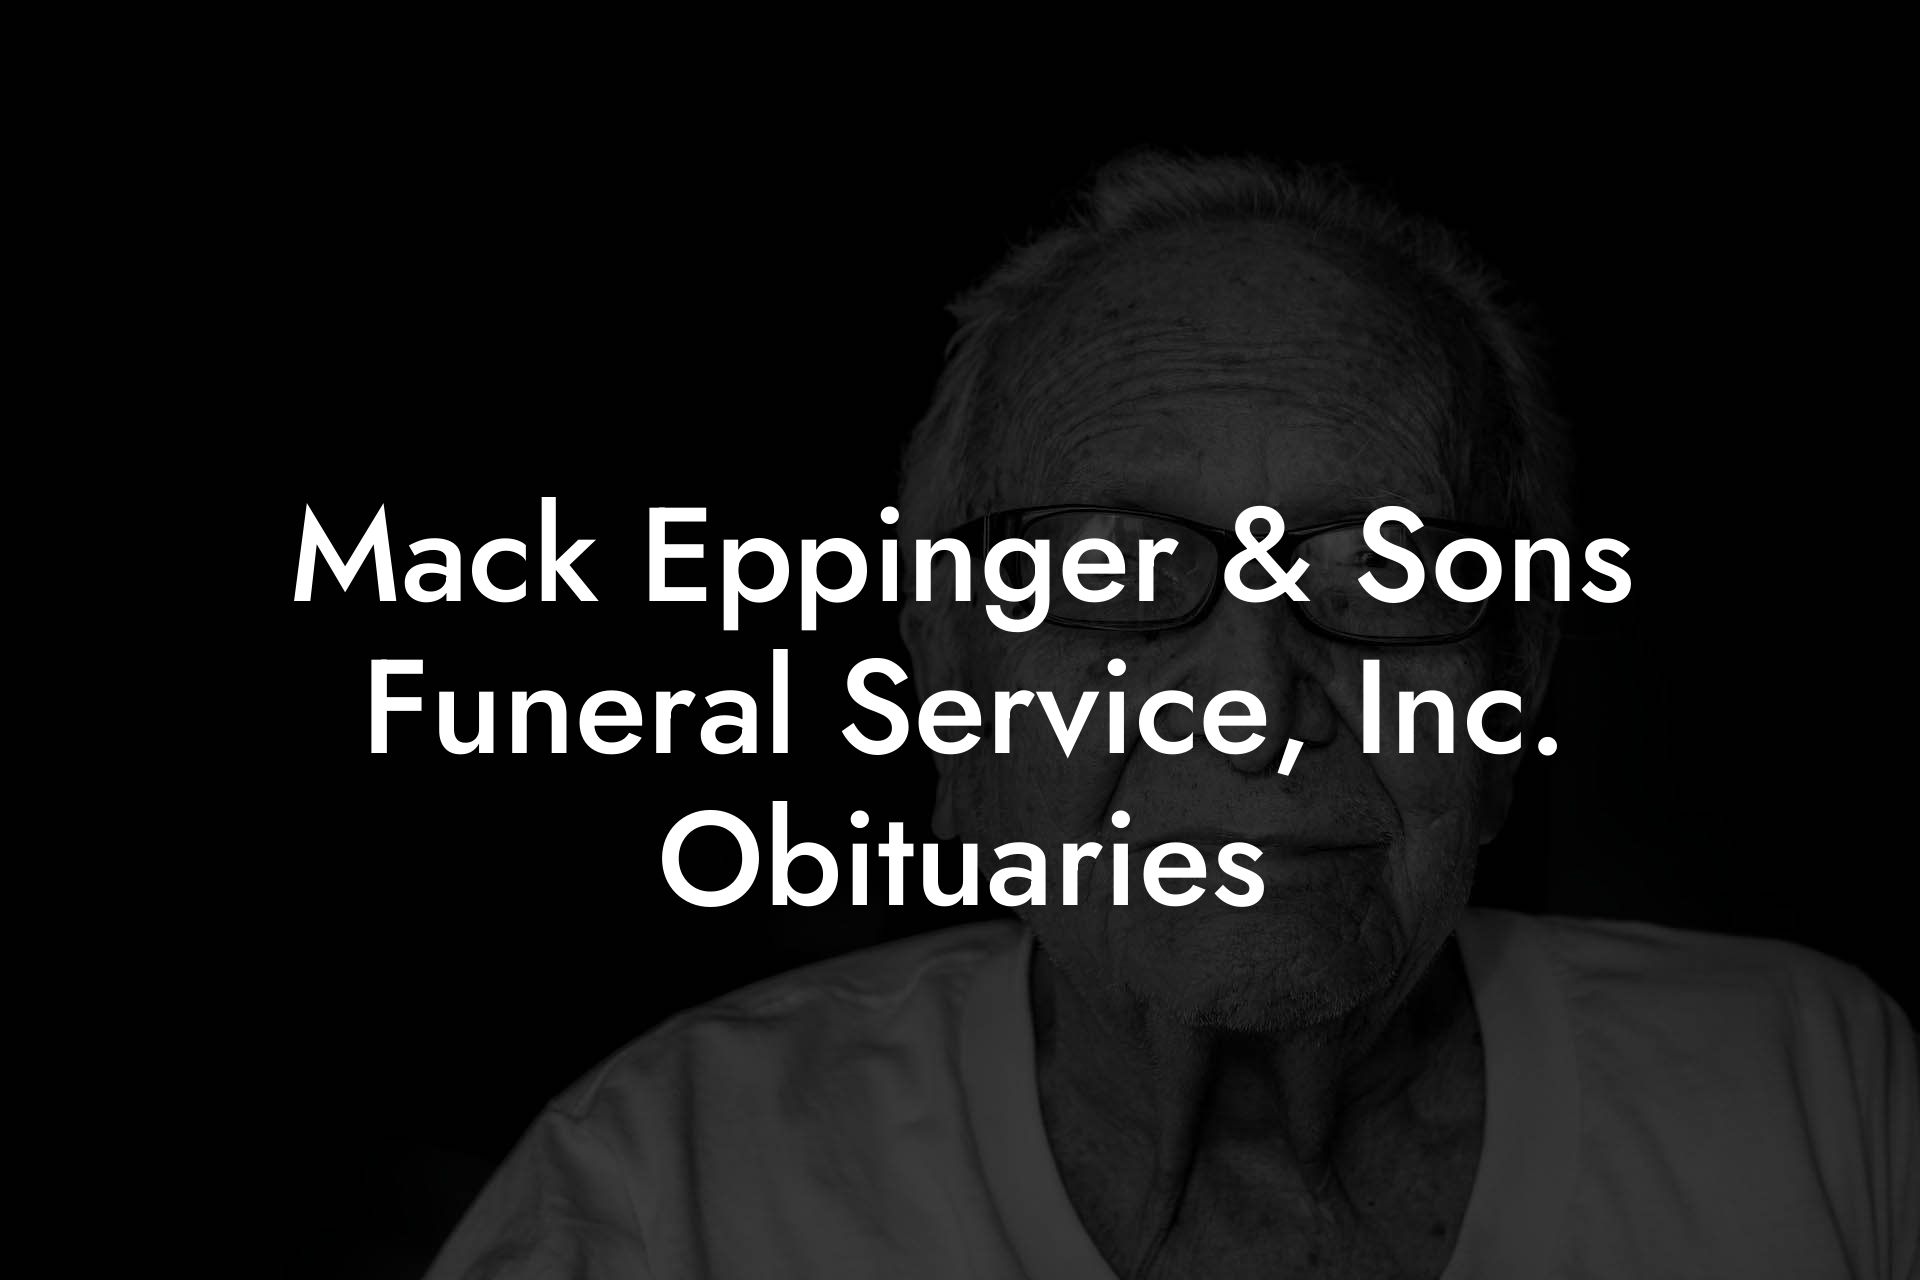 Mack Eppinger & Sons Funeral Service, Inc. Obituaries